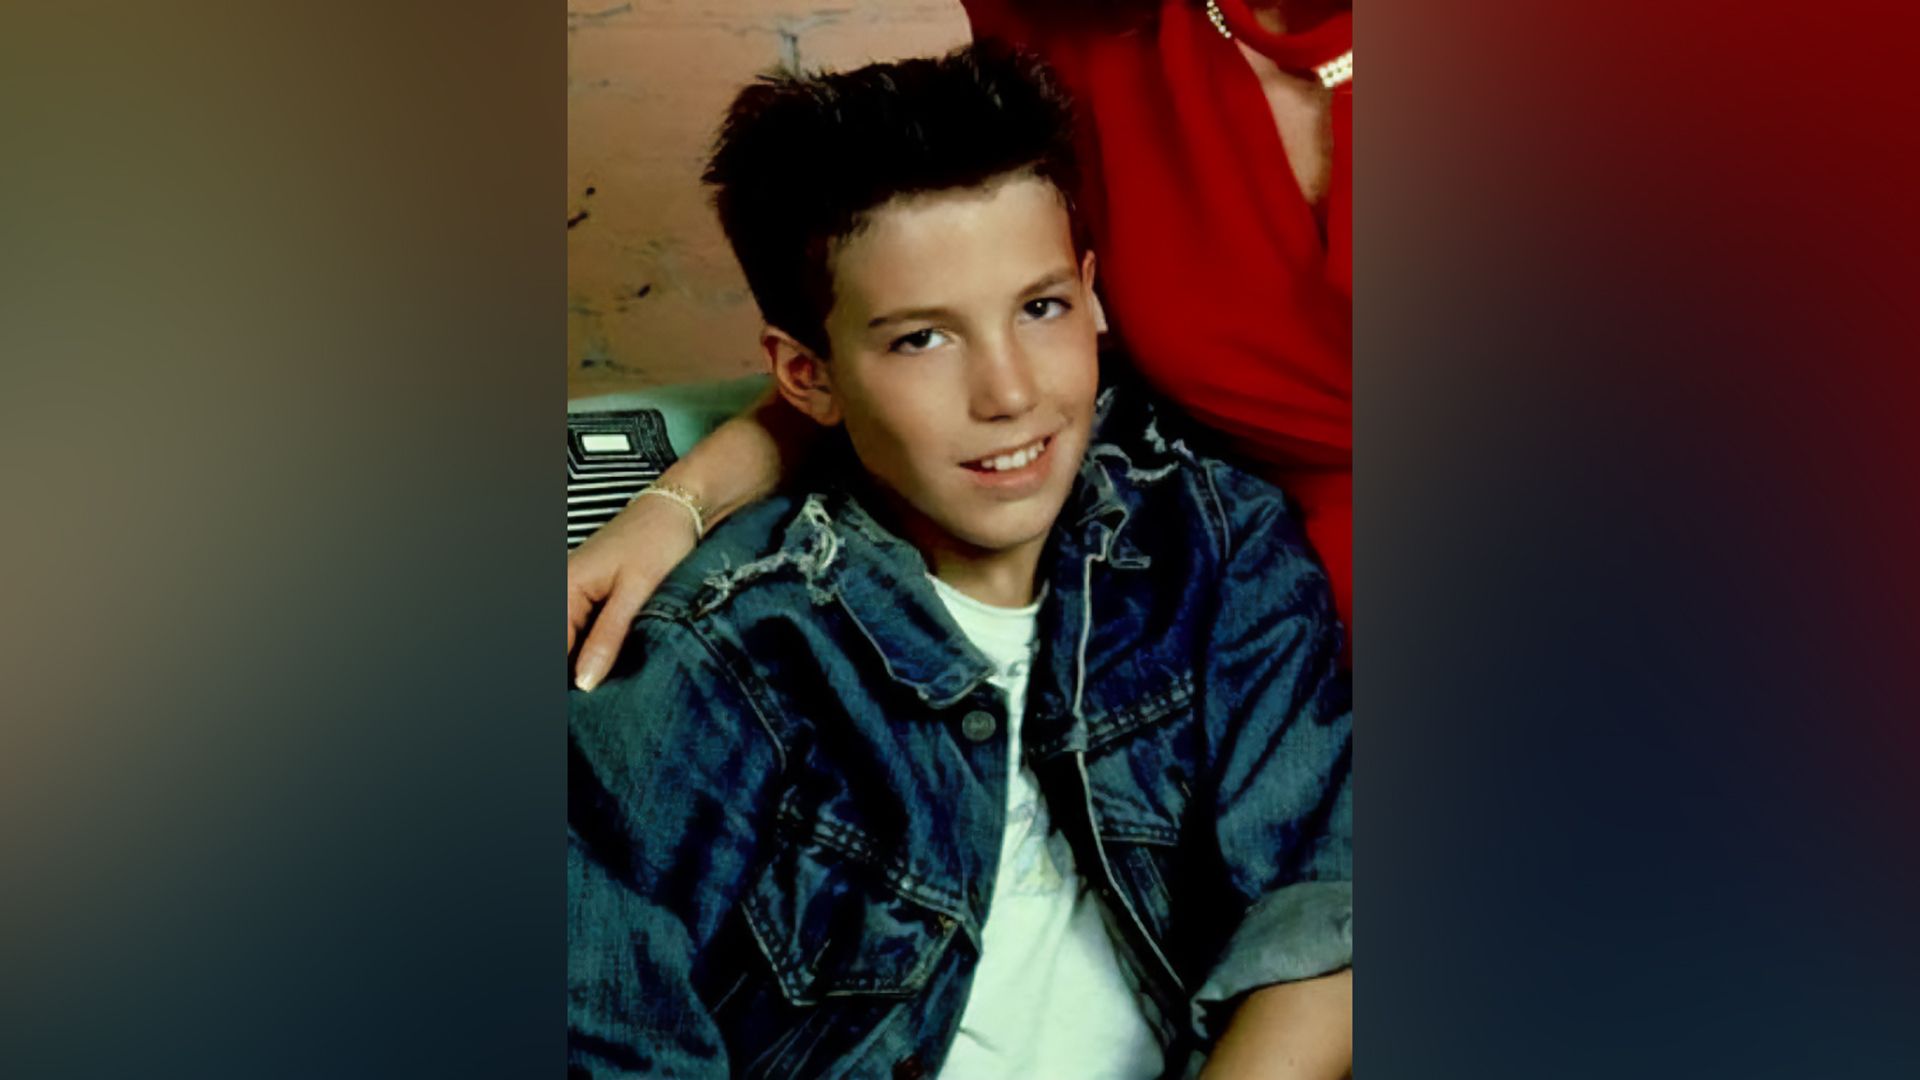 Ben Affleck was quite a hothead in his youth